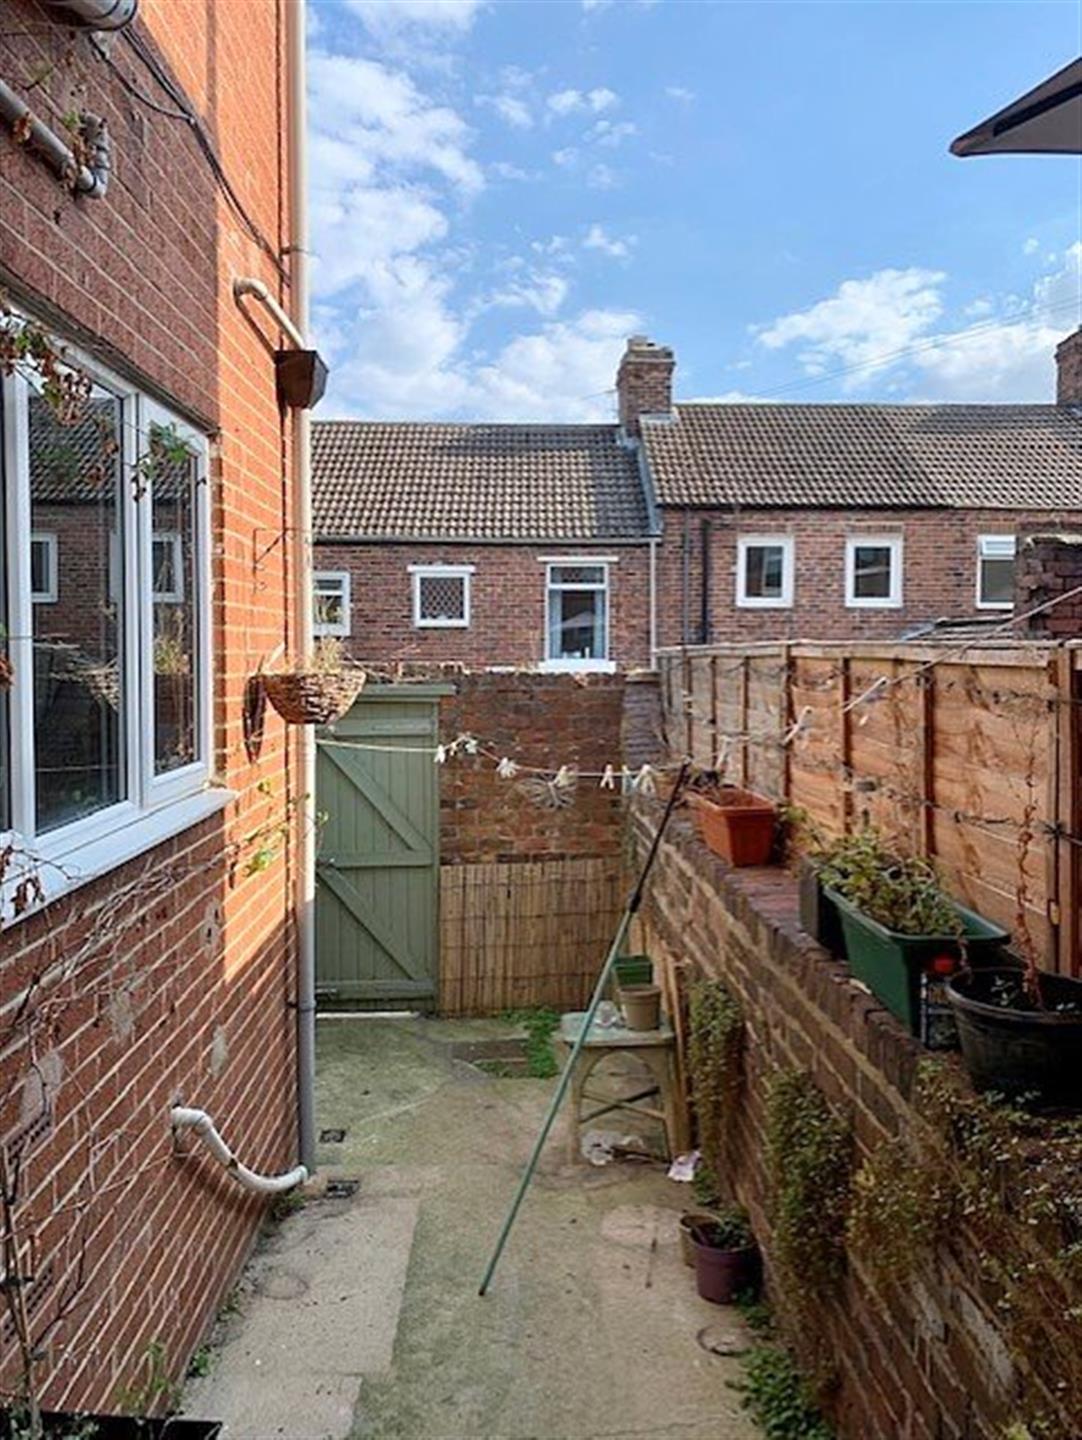 2 bedroom terraced house To Let in Shildon - photograph 2.